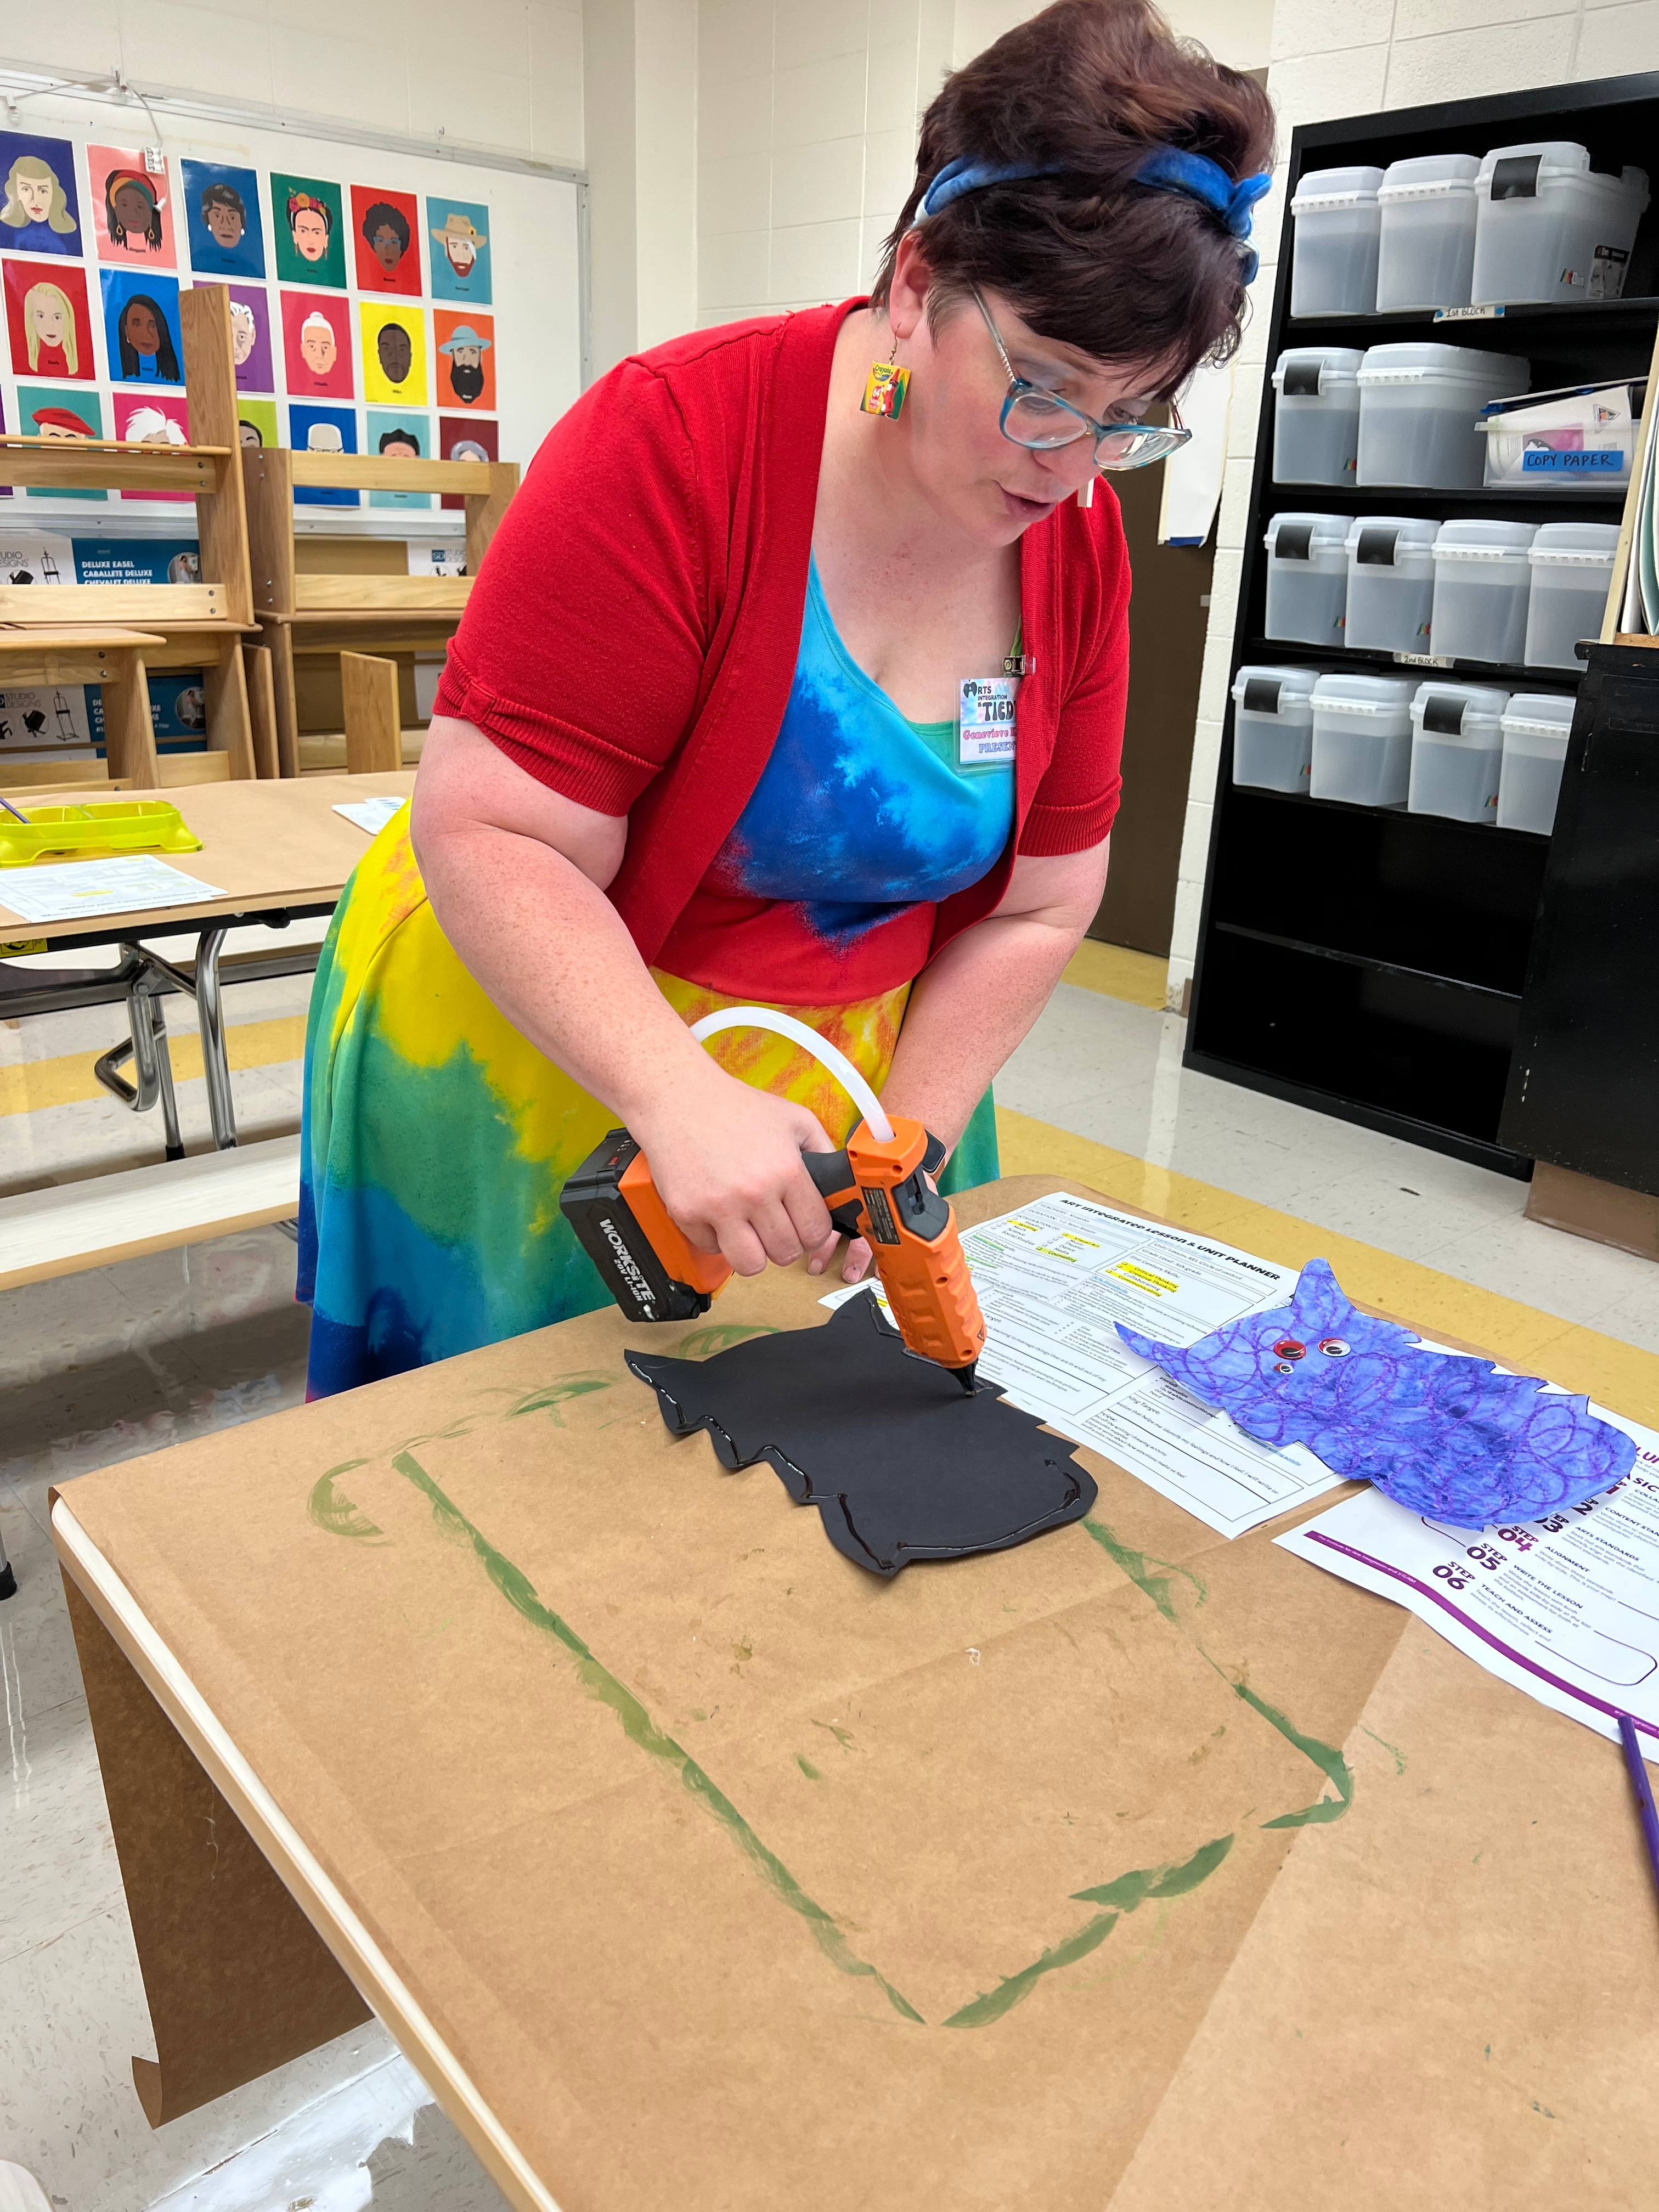 A woman in a rainbow dress uses a hot glue gun while working on an art project